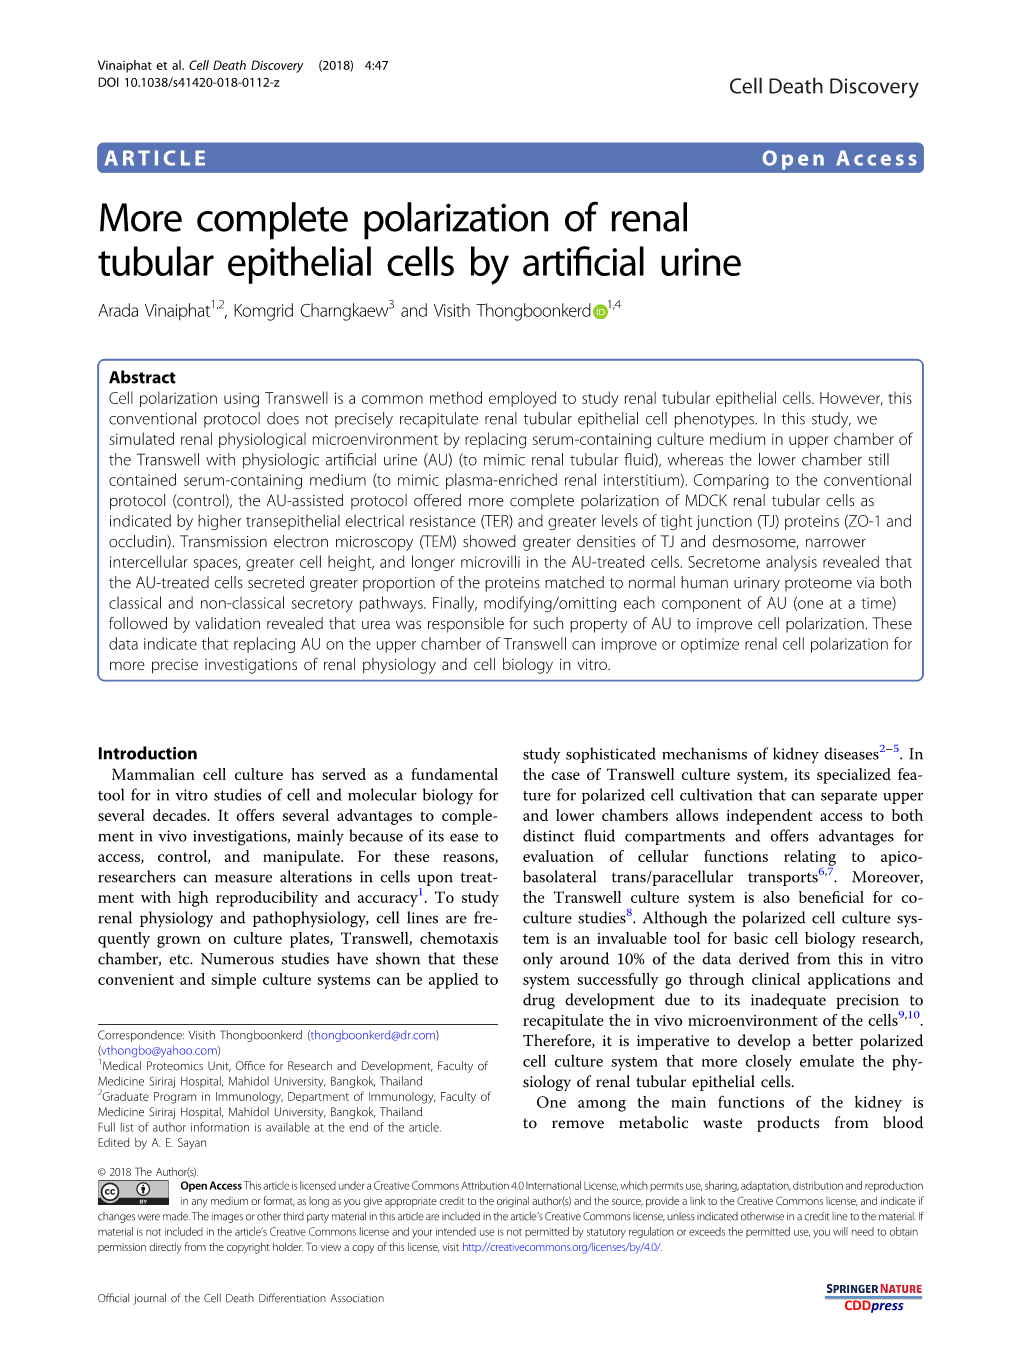 More Complete Polarization of Renal Tubular Epithelial Cells by Artificial Urine